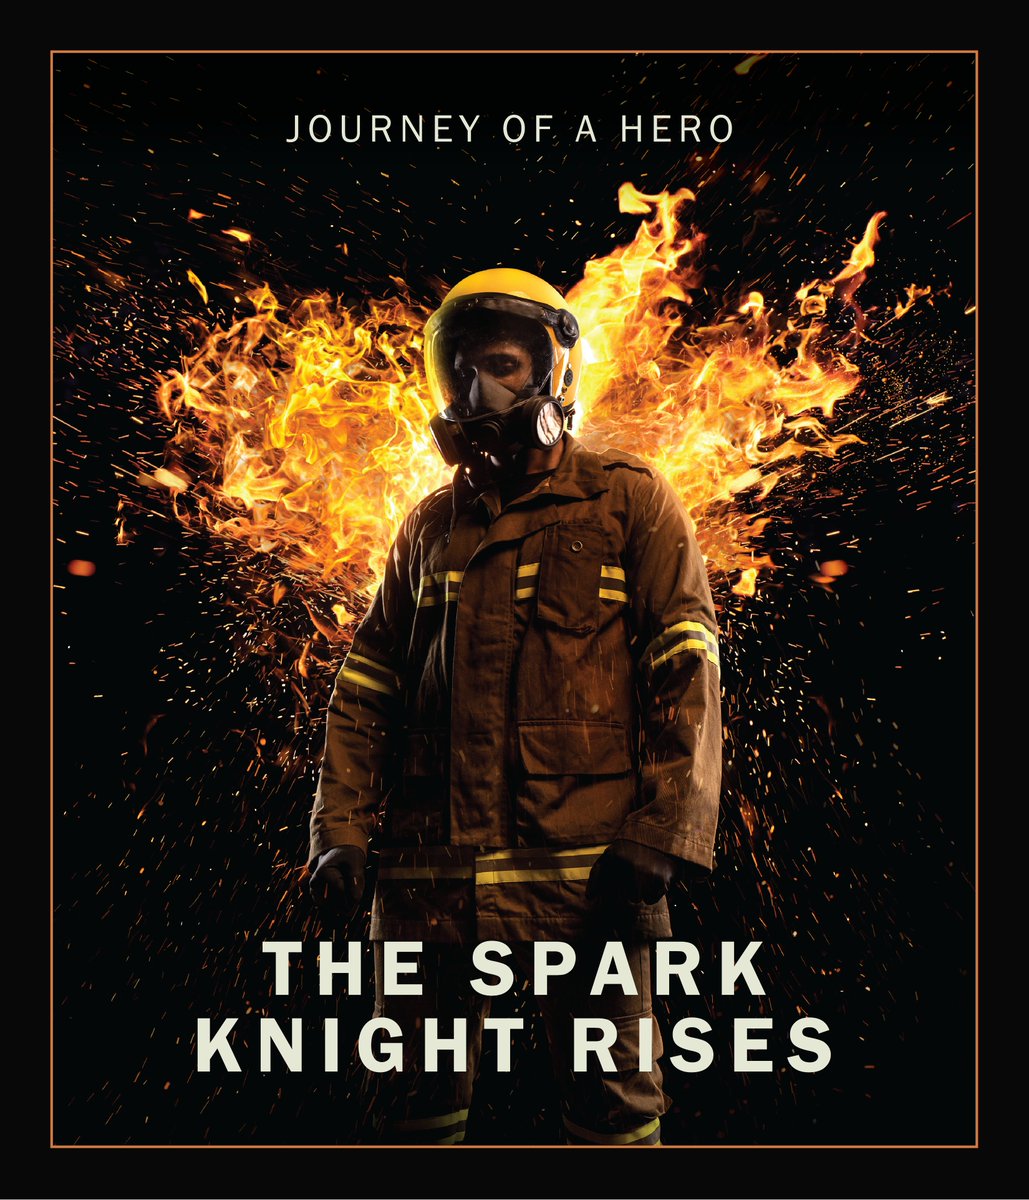 Bravery in the face of danger! Witness the journey of a hero as The Spark Knight Rises. Their courage illuminates the darkest nights, proving that heroes are made, not born. #Bravery #HERO #fireprevention #FireSafety #SafetyTips #WorkplaceSafety #Firefighting #Firepumps